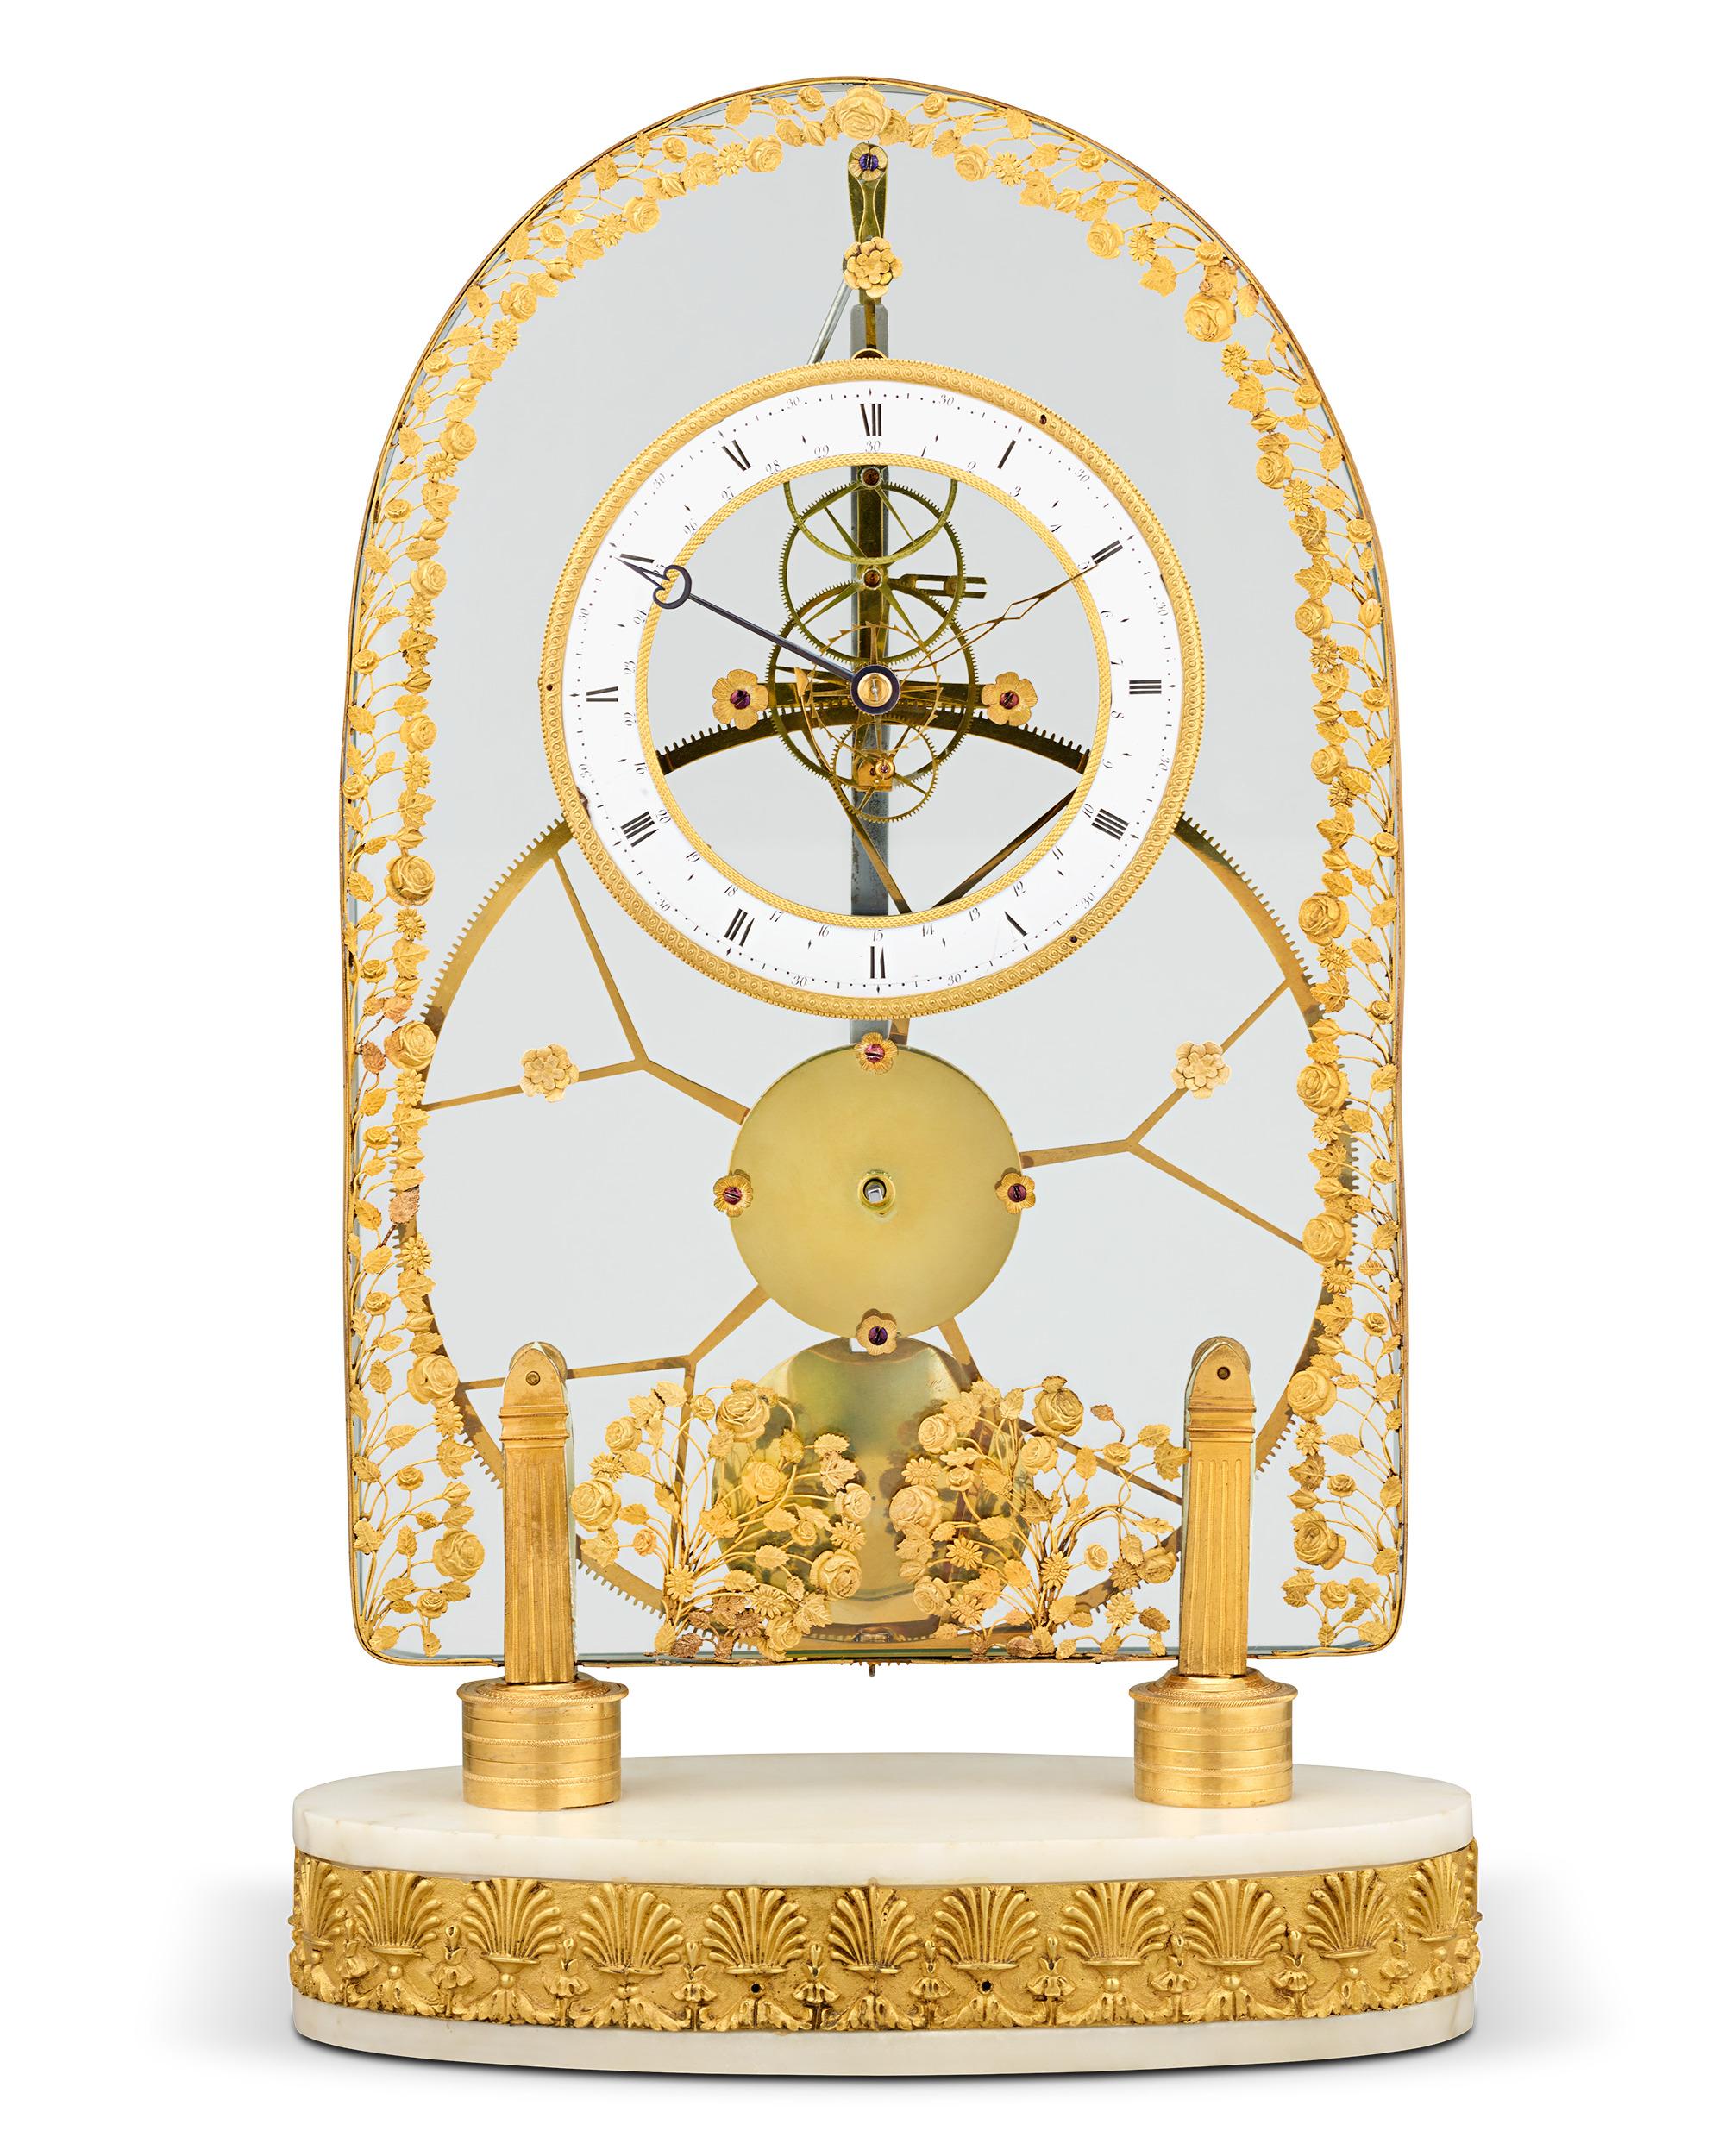 This important glass-fronted French Empire great wheel skeleton clock has the remarkable ability to run with incredible accuracy for more than a week on a single winding. The large central wheel and the rare combination of the pin-wheel escapement